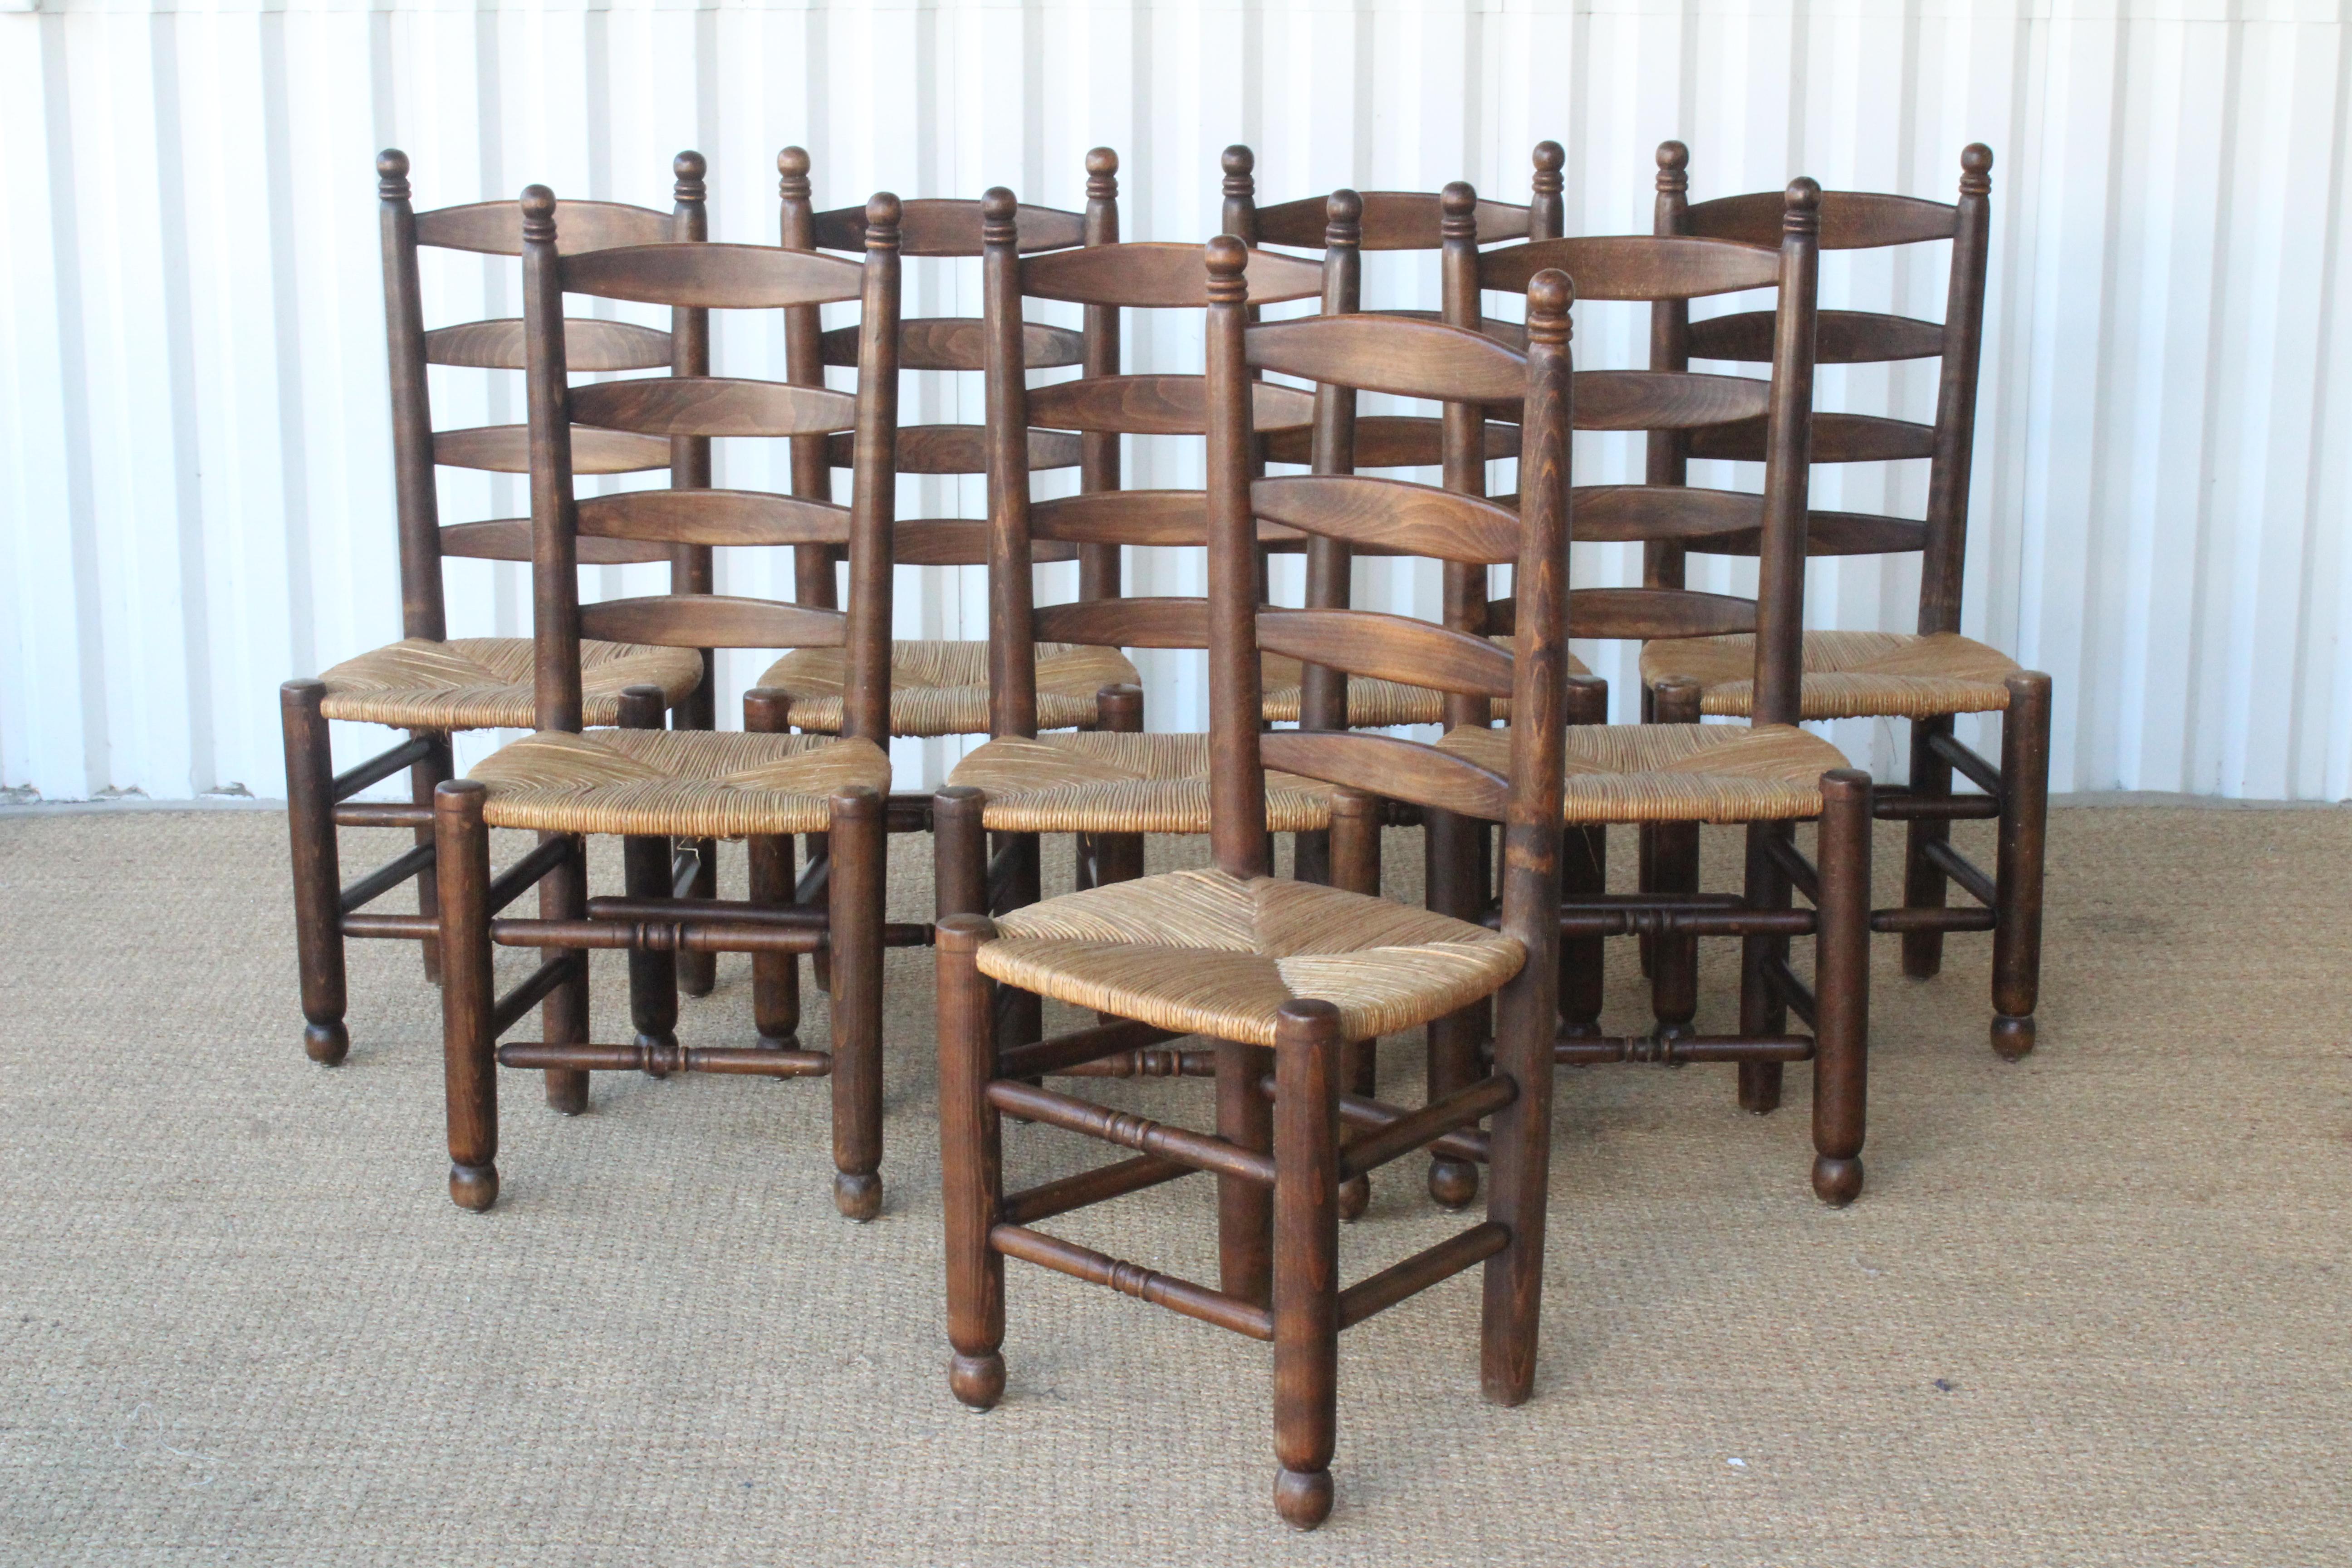 Set of eight rustic dining chairs made of oak with woven rush seats. made in France in the 1960s. The oak frames are in the original dark stained finish. The rush seats are original and in excellent condition. Sold only as a set of eight.